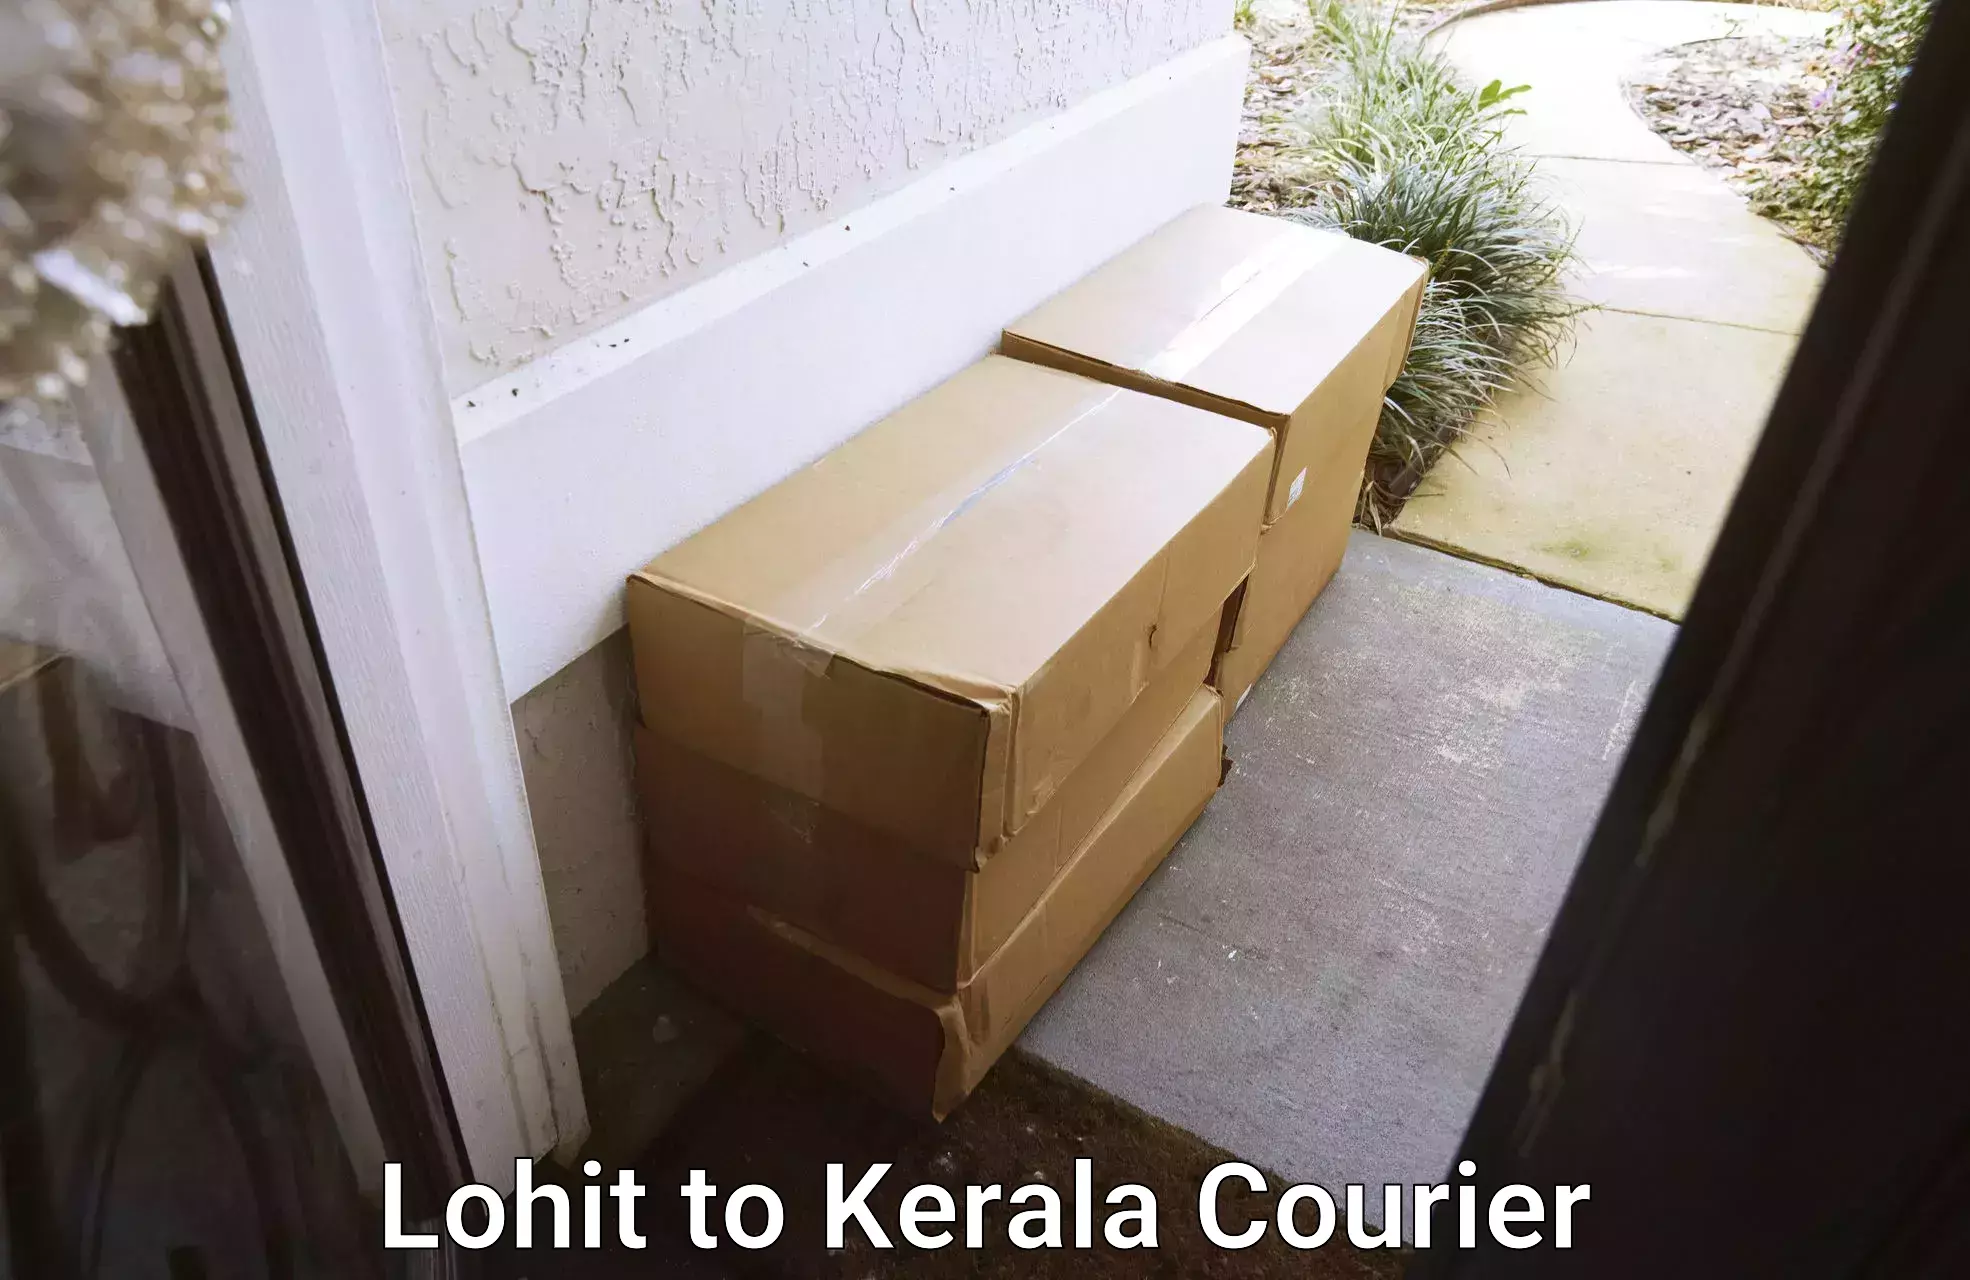 Automated parcel services Lohit to Allepey